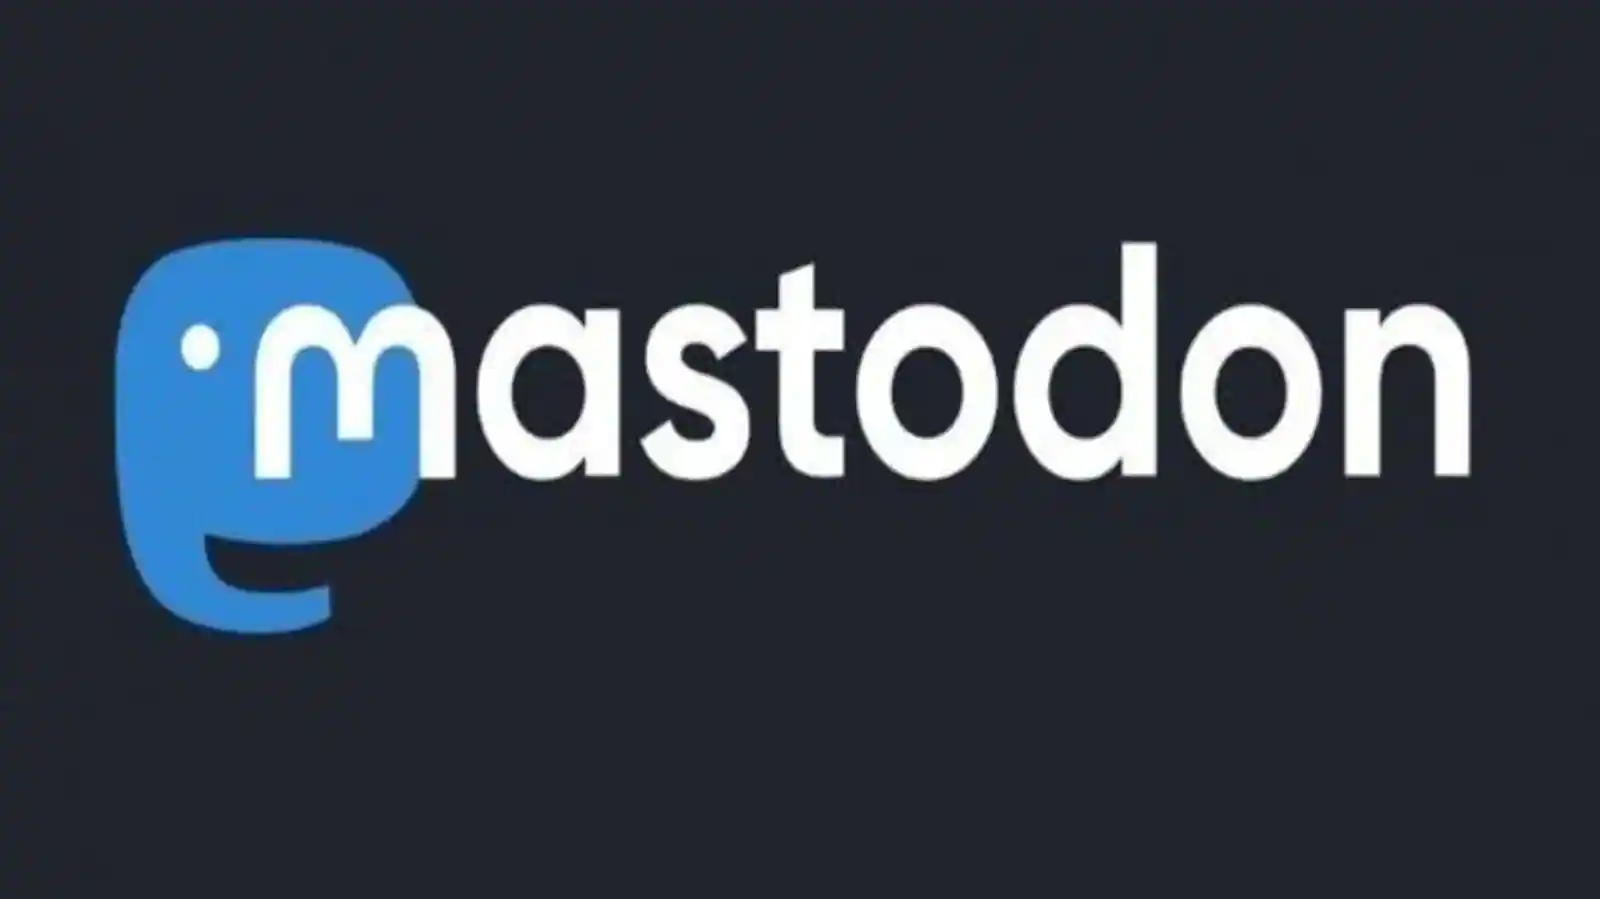 Mastodon becomes a preference for Twitter users to switch off.